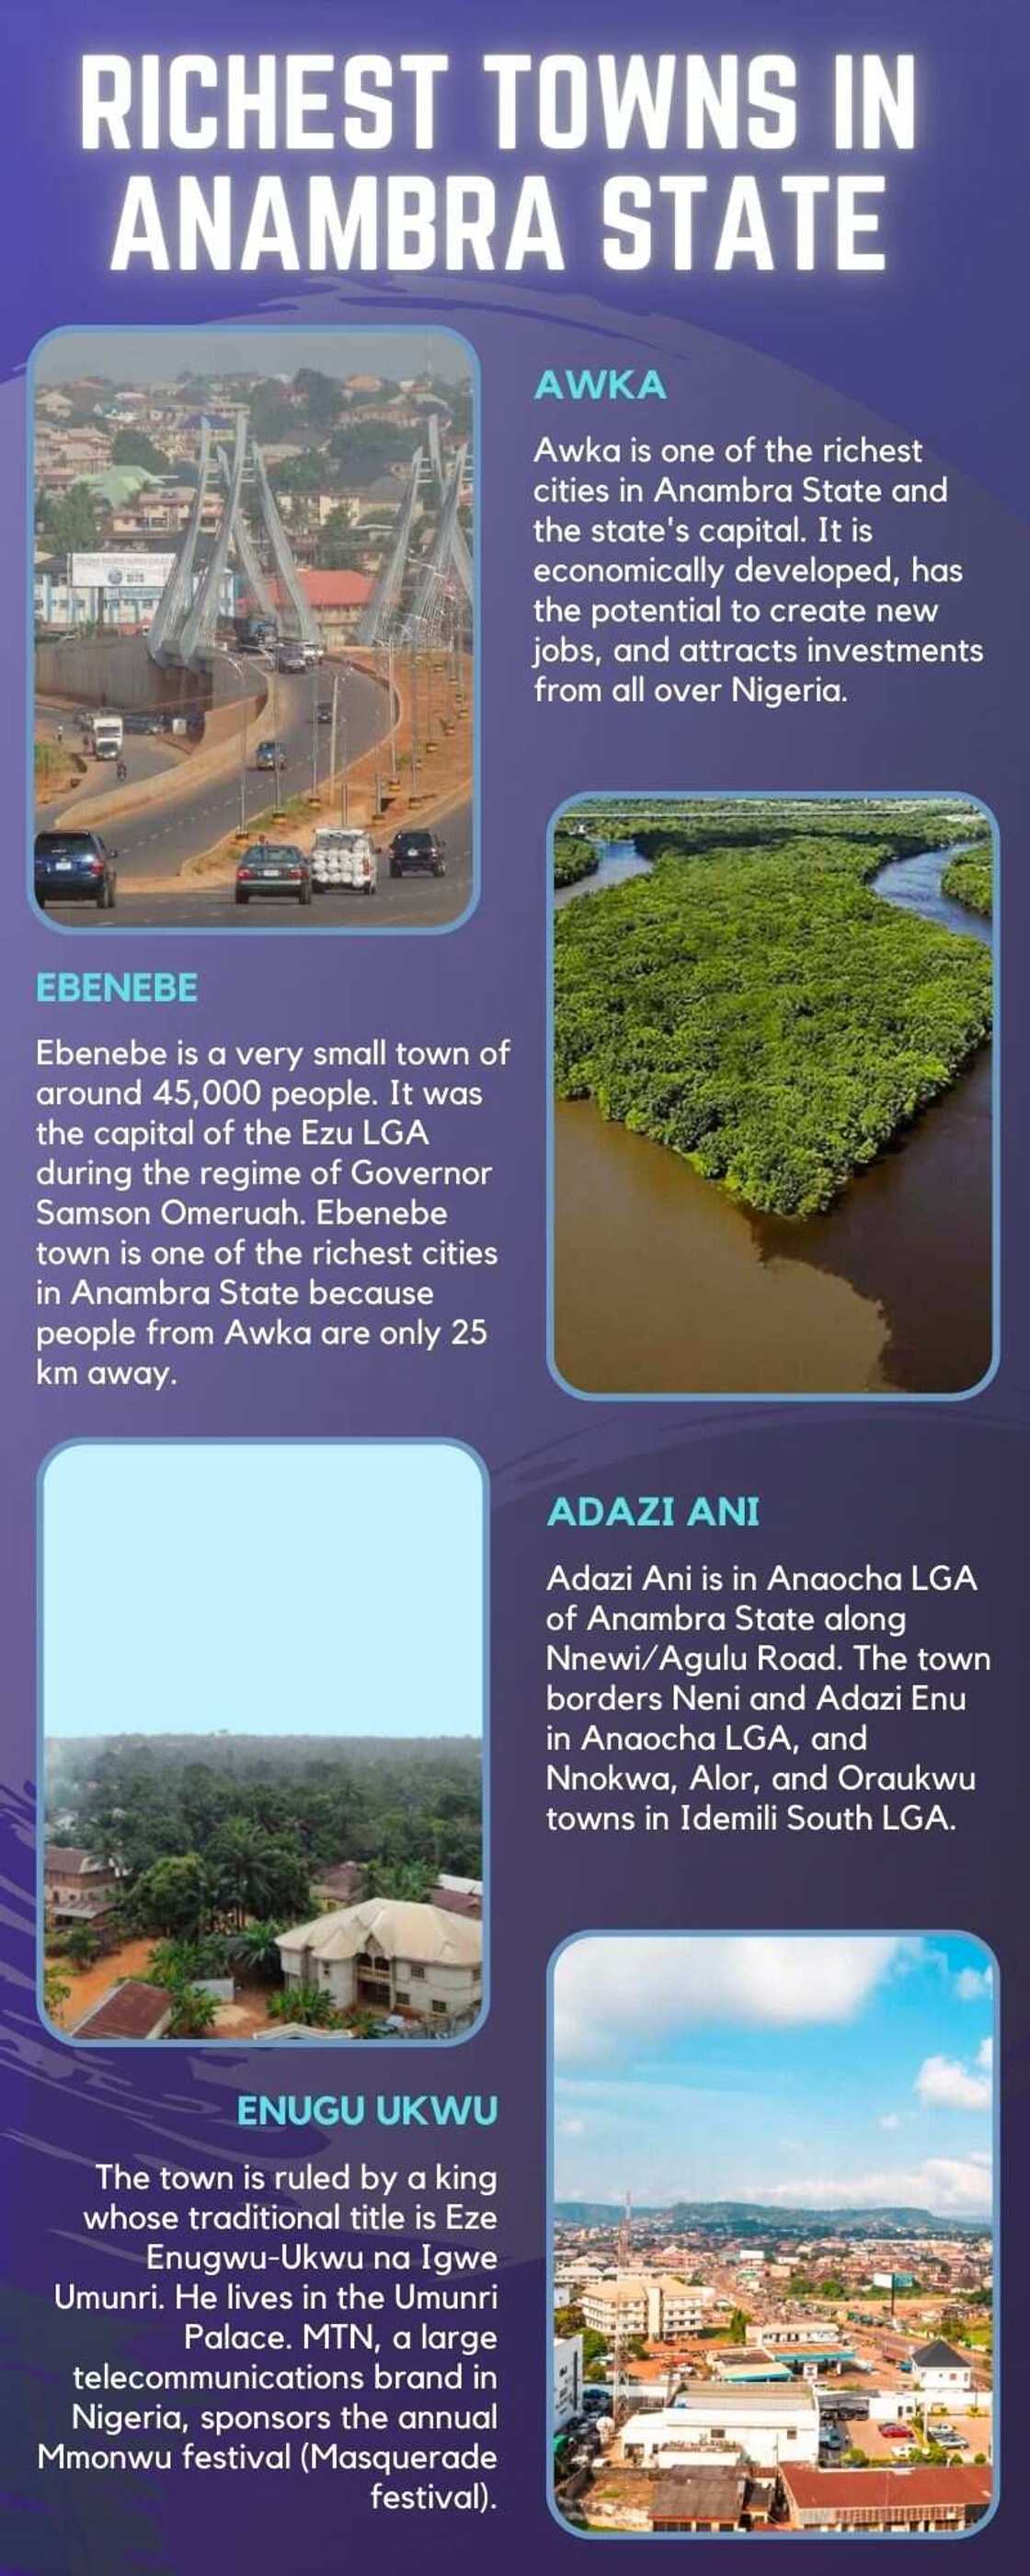 Richest towns in Anambra state